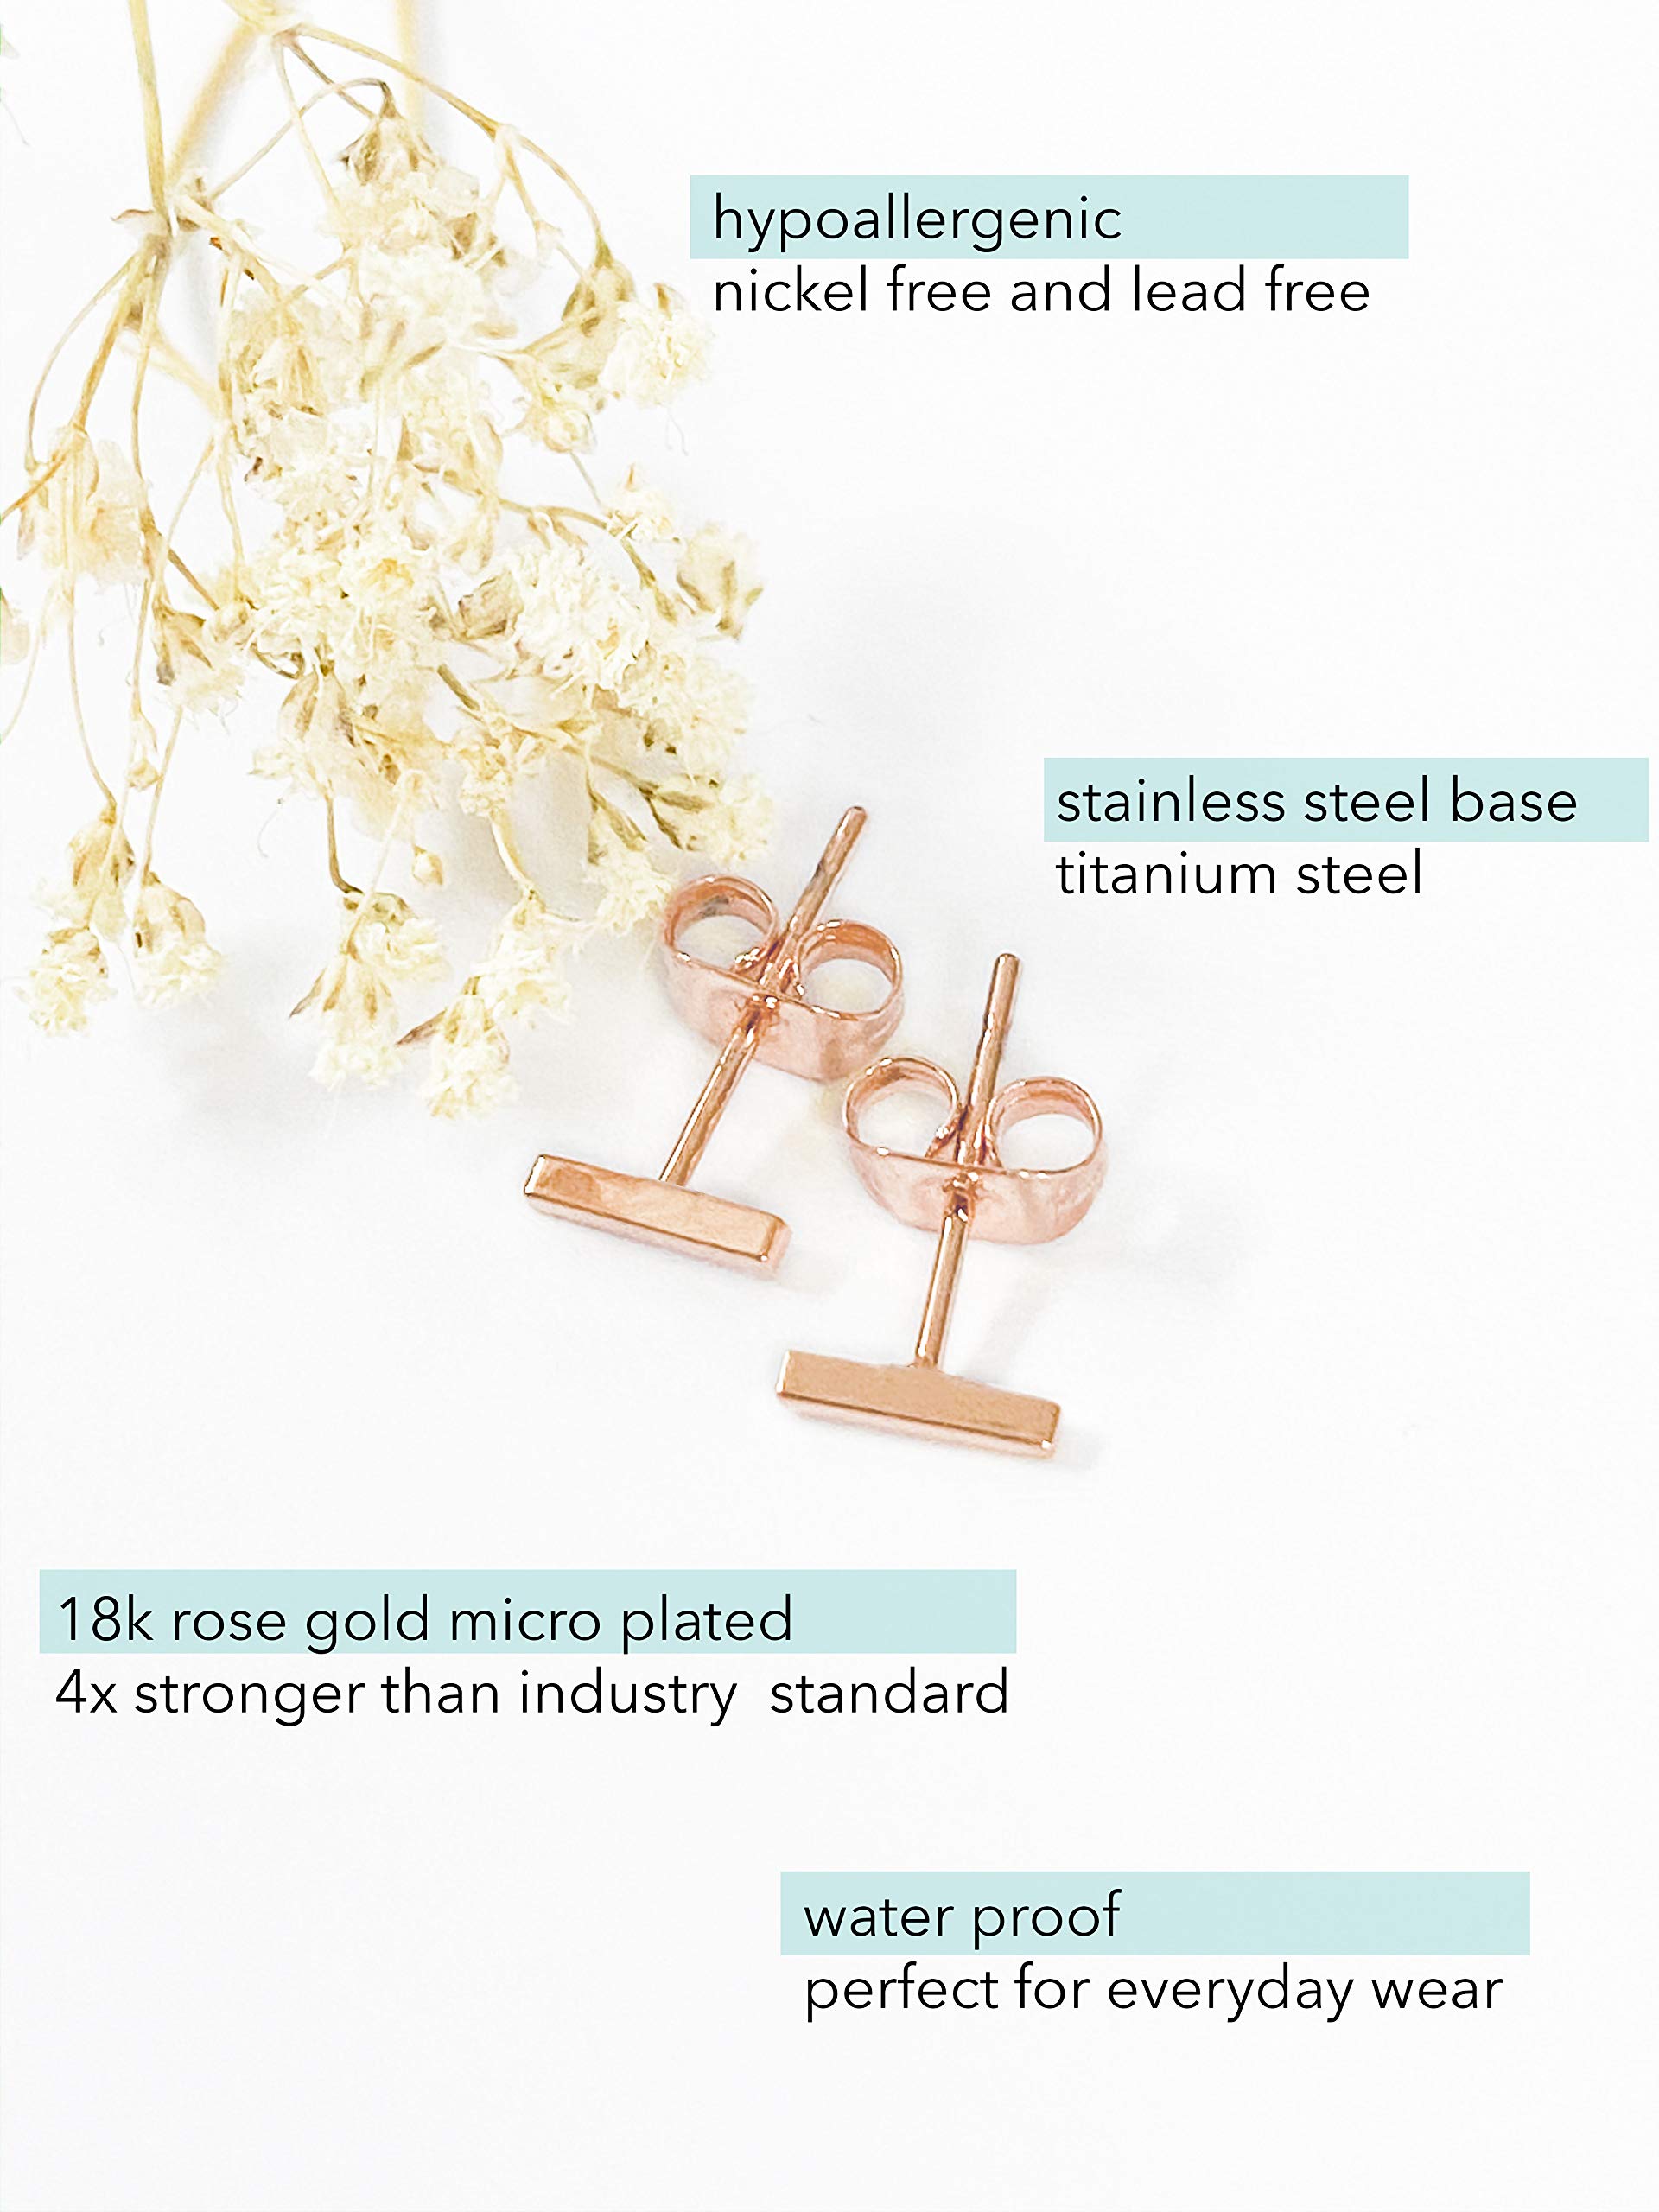 Altitude Boutique 18K Gold Plated Skinny Wire Midi Balance Bar Stud Earrings Hypoallergenic Long Bar Earrings in Gold, Rose Gold, or Silver | Delicate Jewelry (Rose Gold, 6mm)